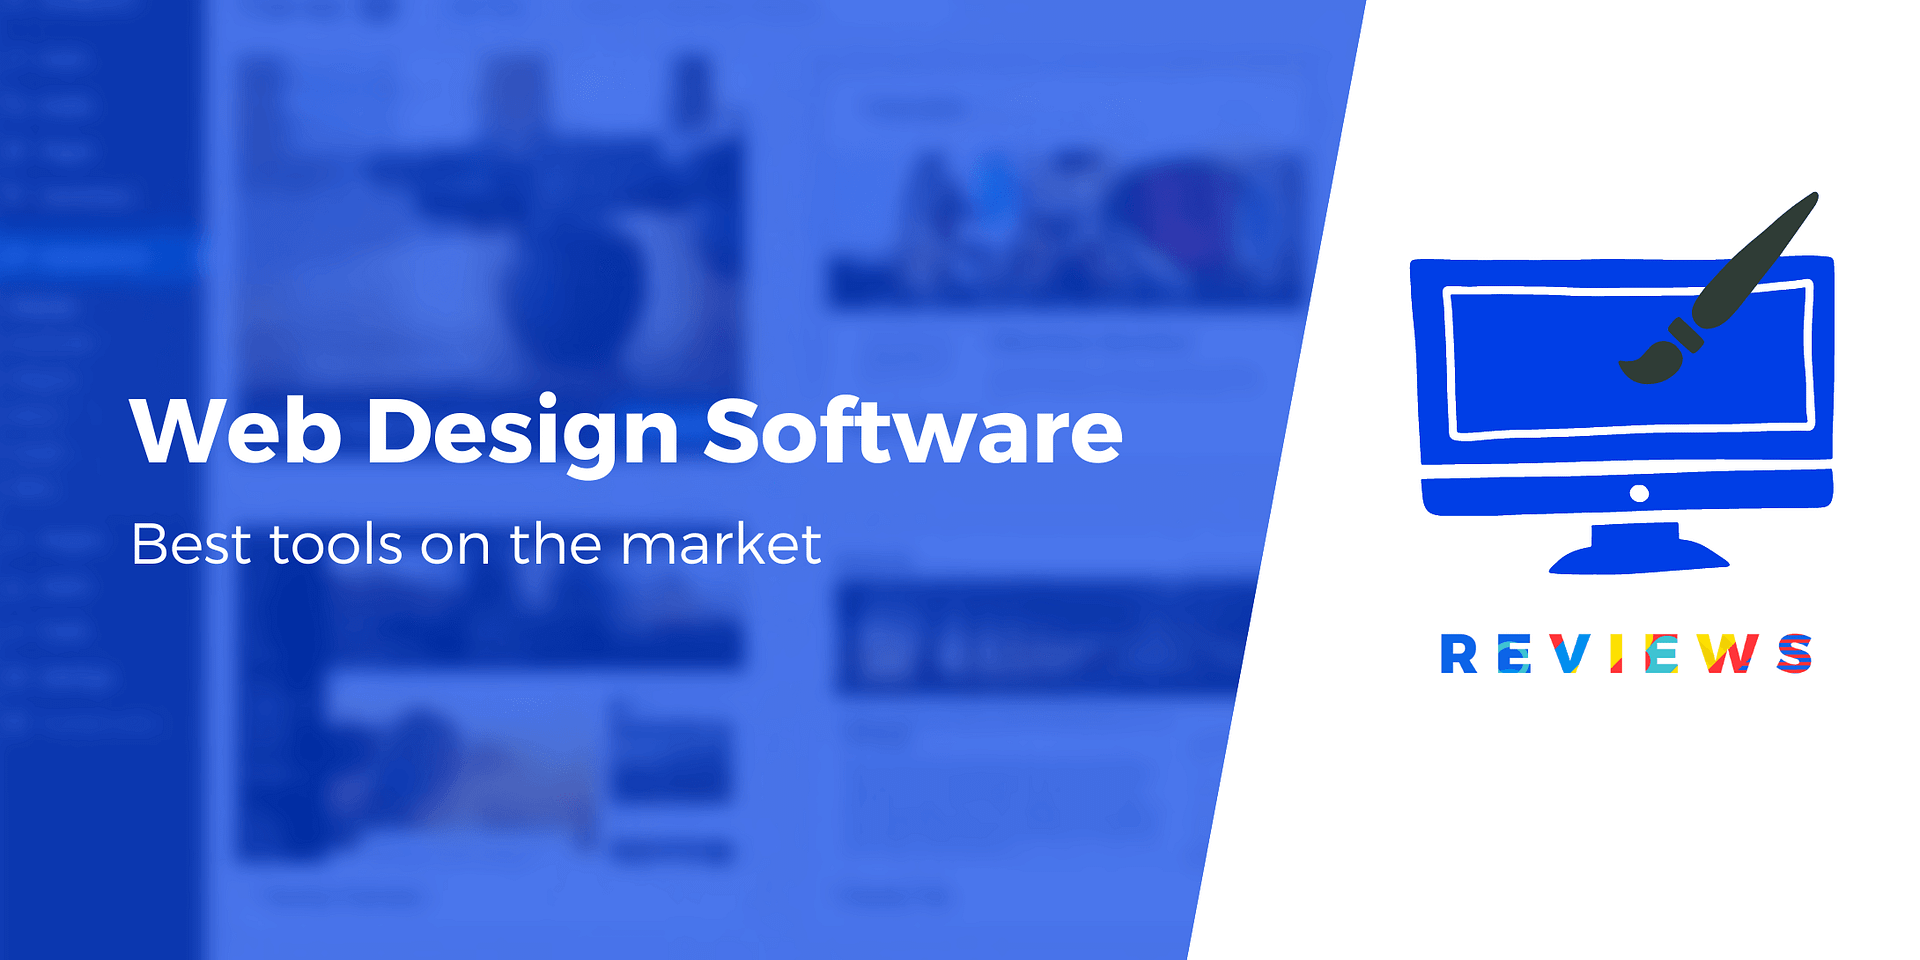 What Tools Do We Need to Design Great Looking Website Graphics?